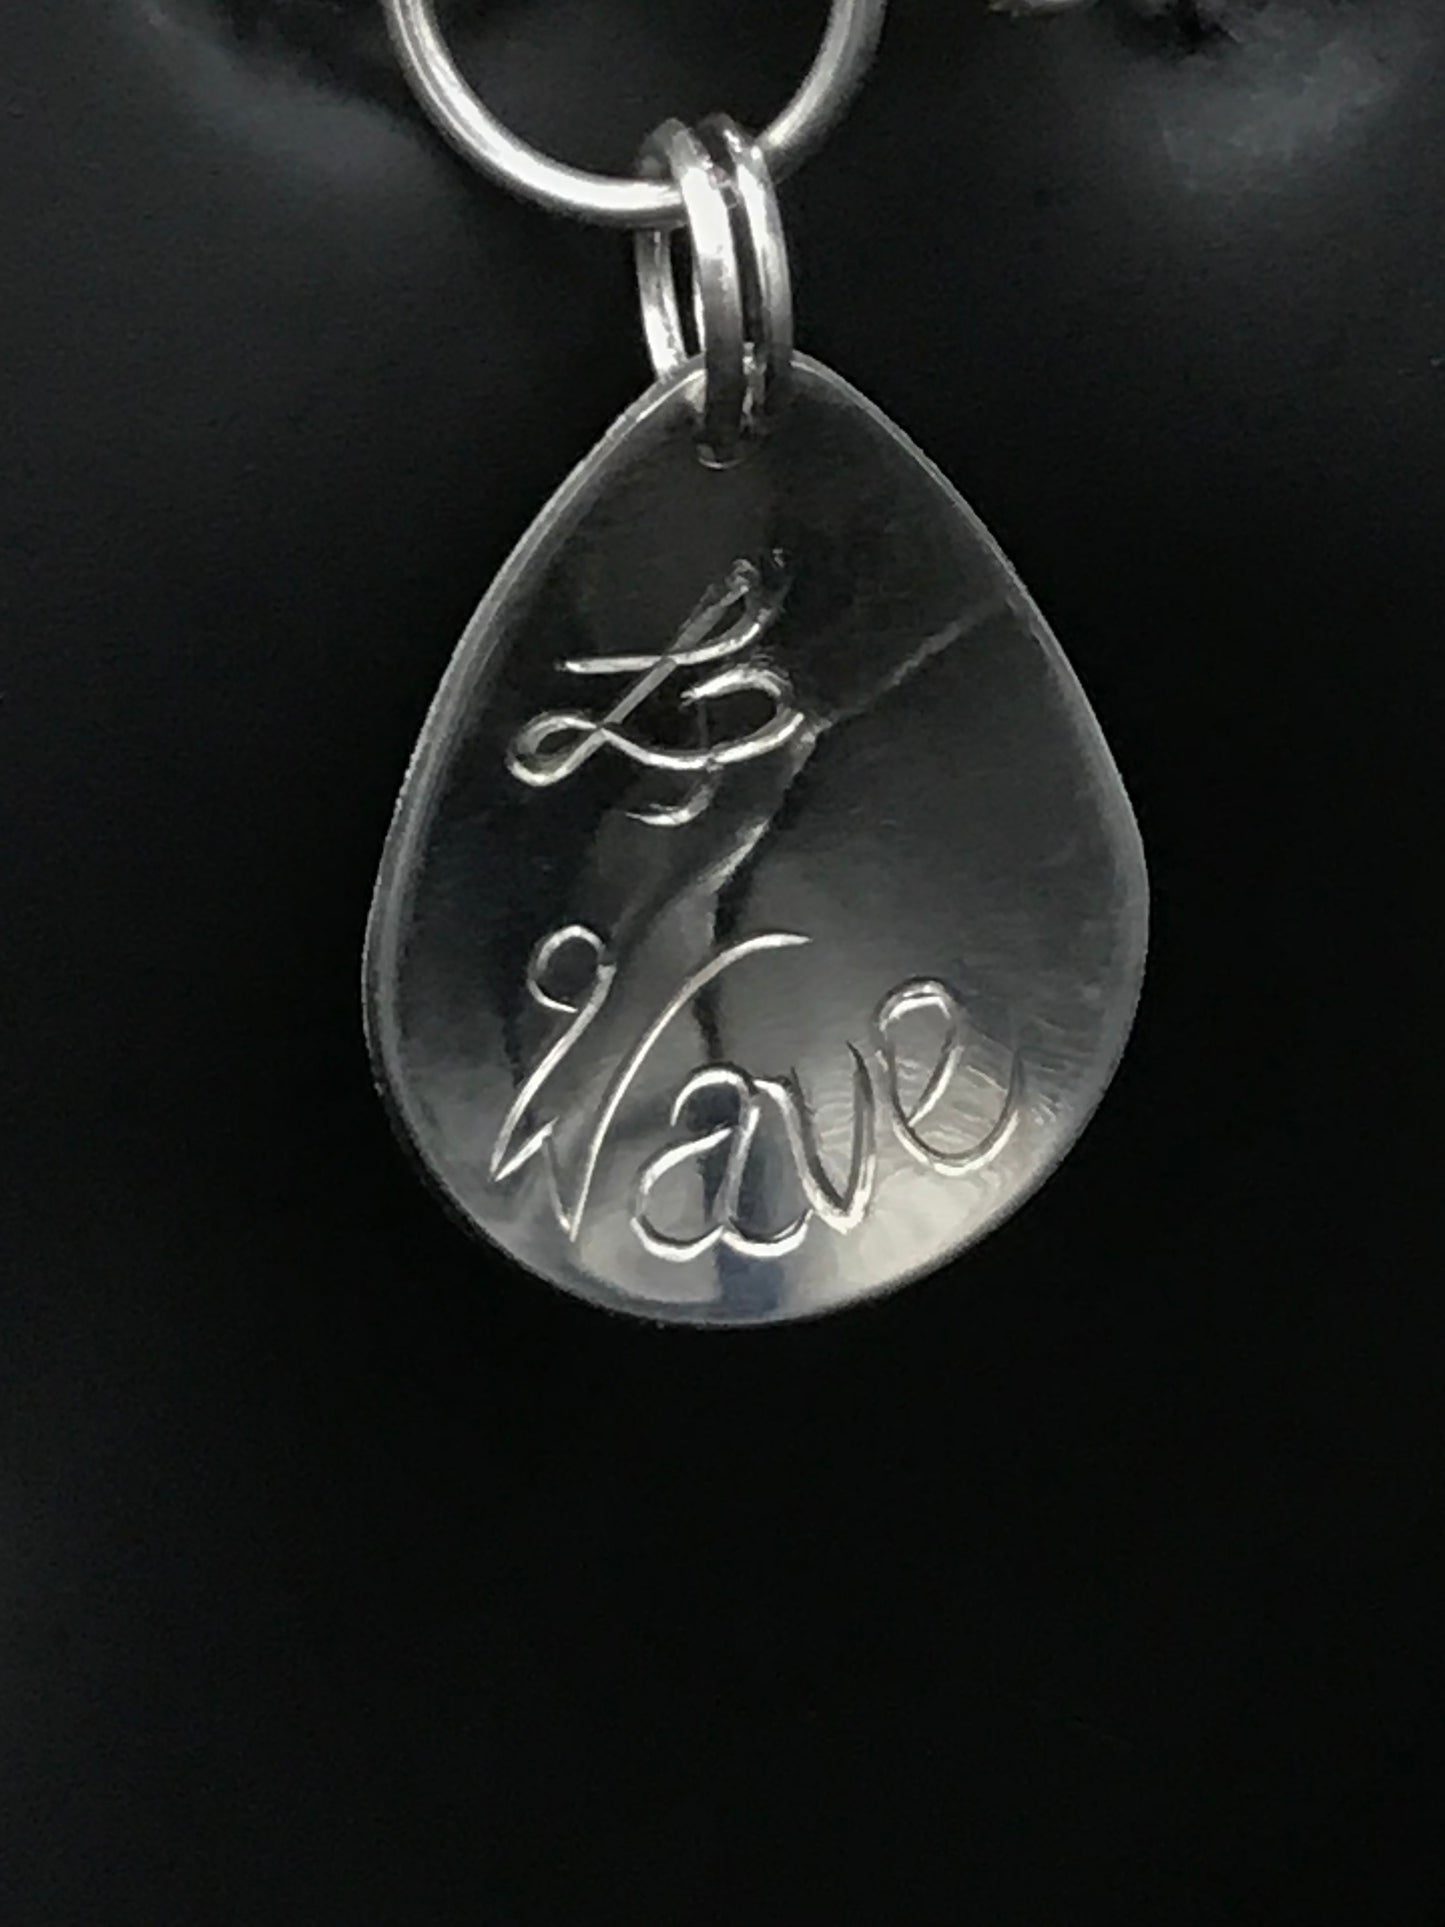 artist initial and Wave engraved on back of charm 